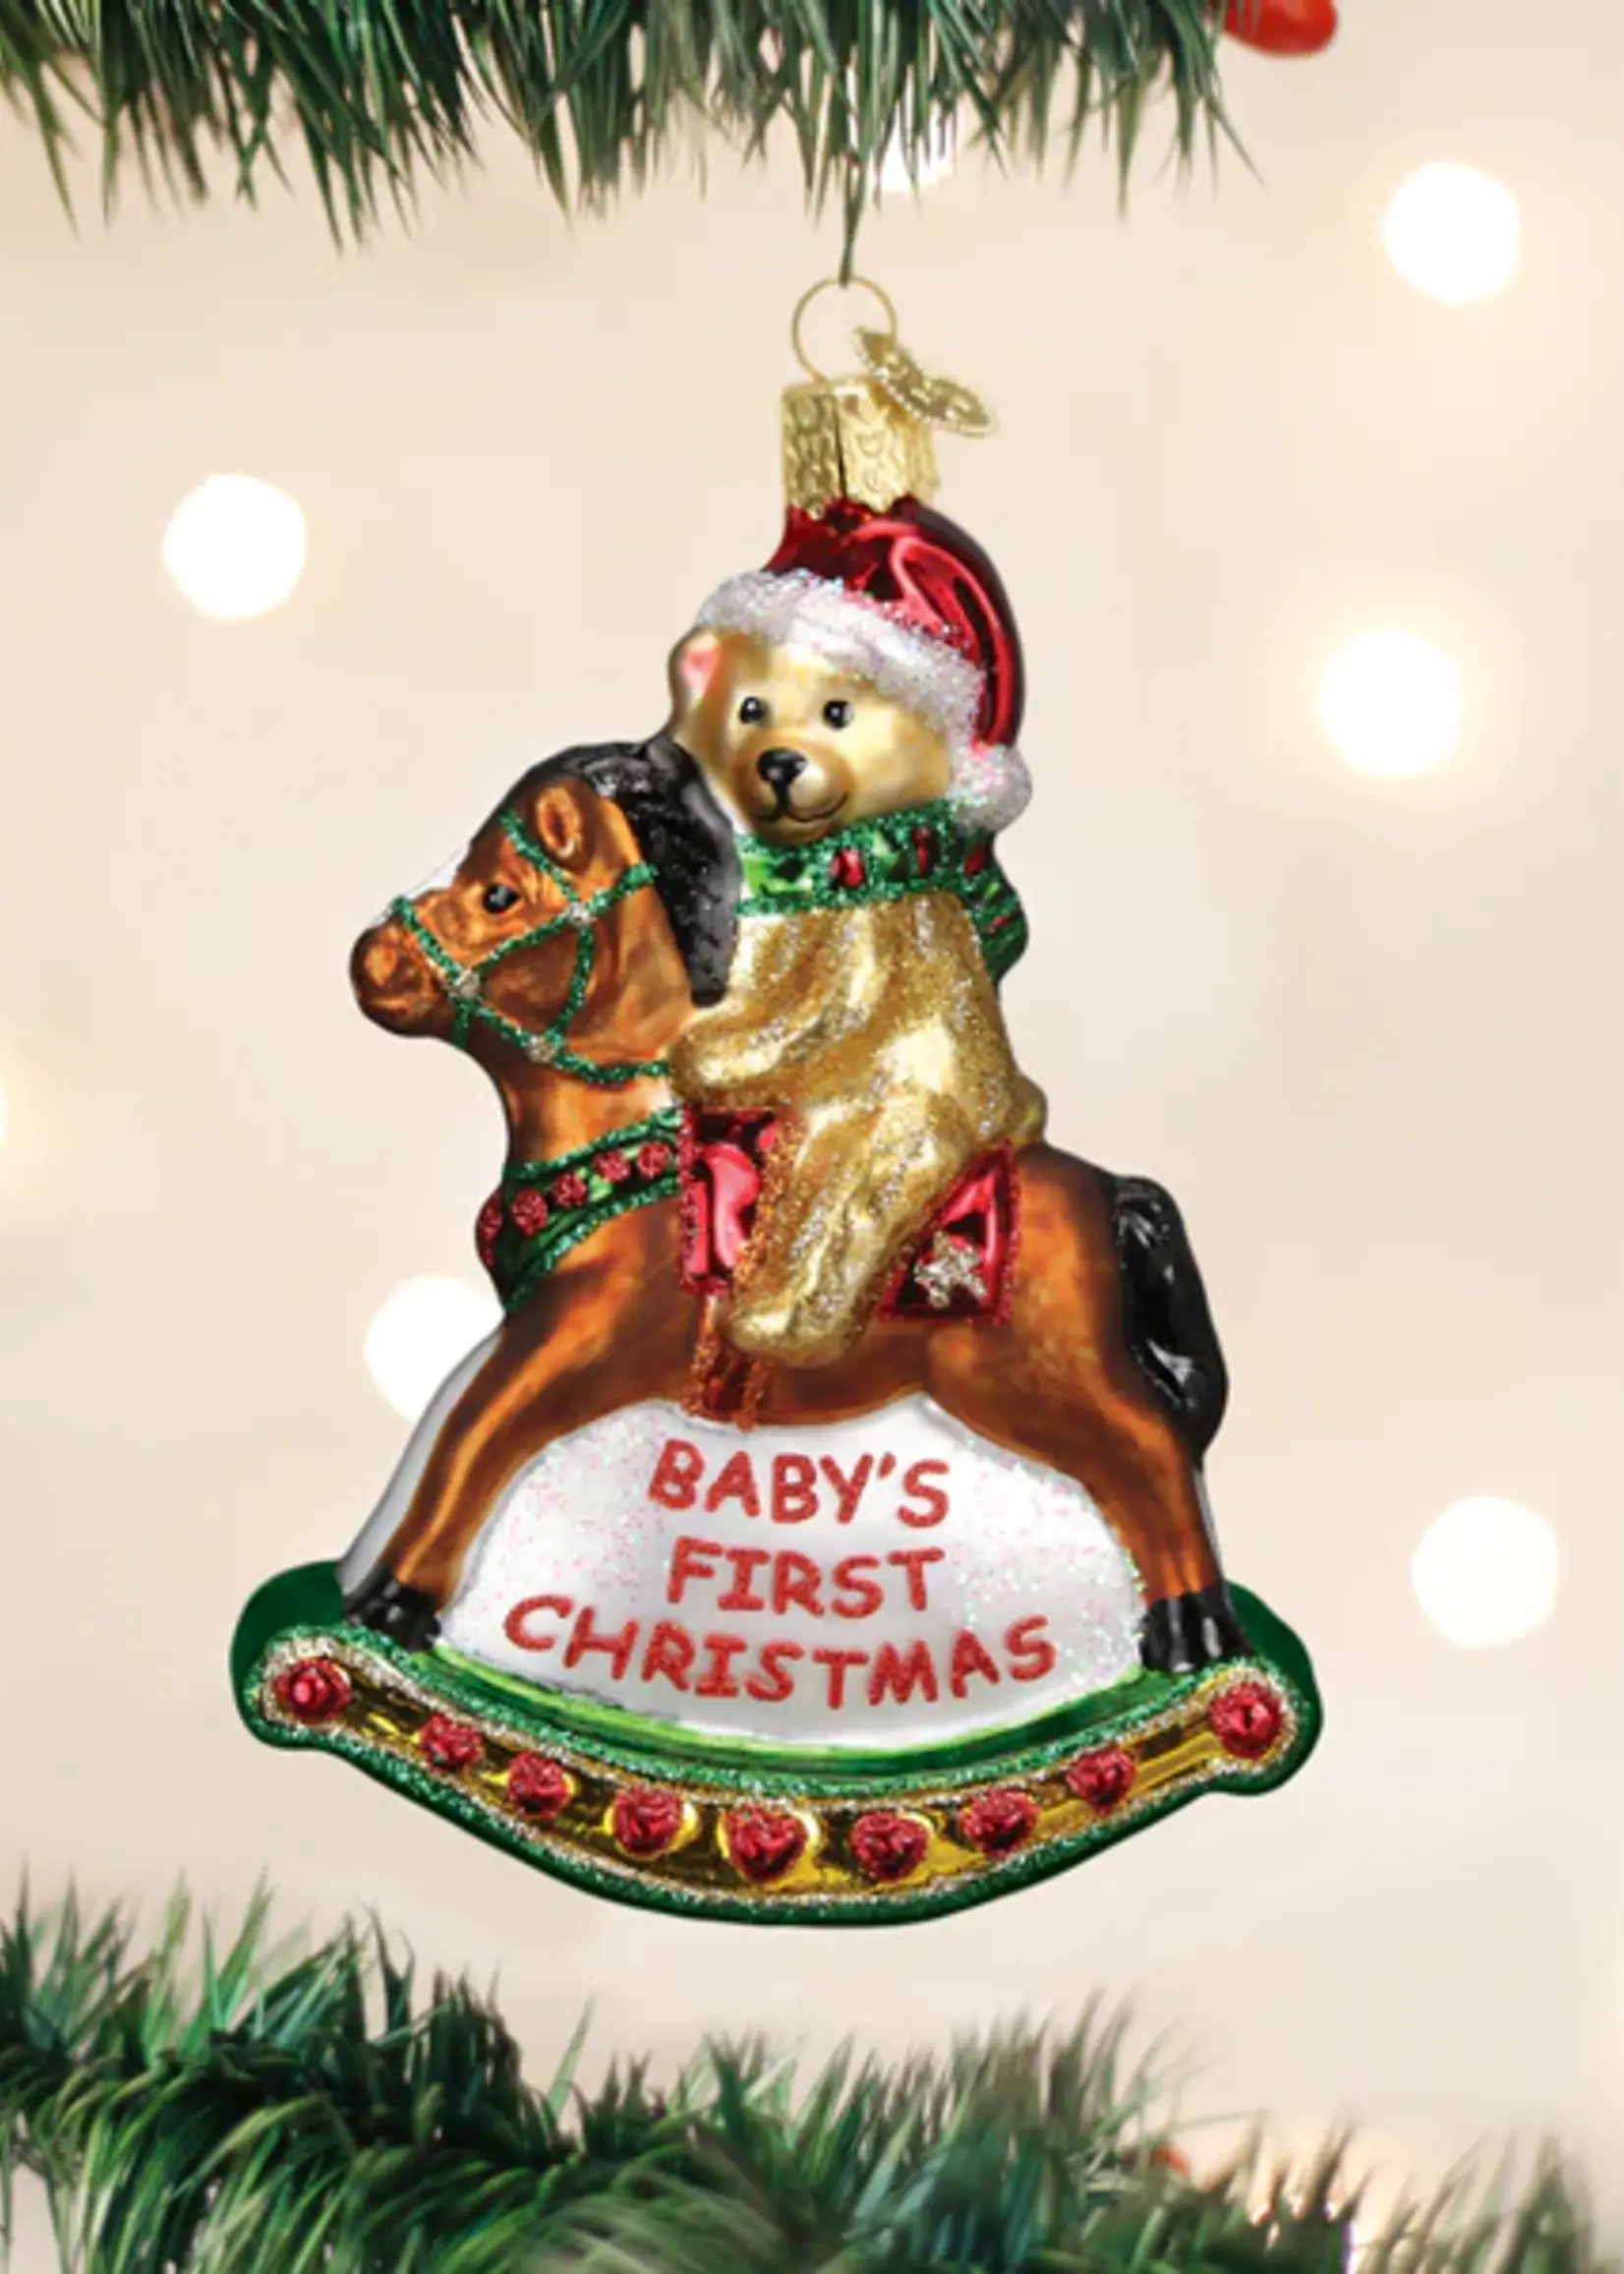 OLD WORLD CHRISTMAS BABY'S FIRST CHRISTMAS ROCKING HORSE ORNAMENT